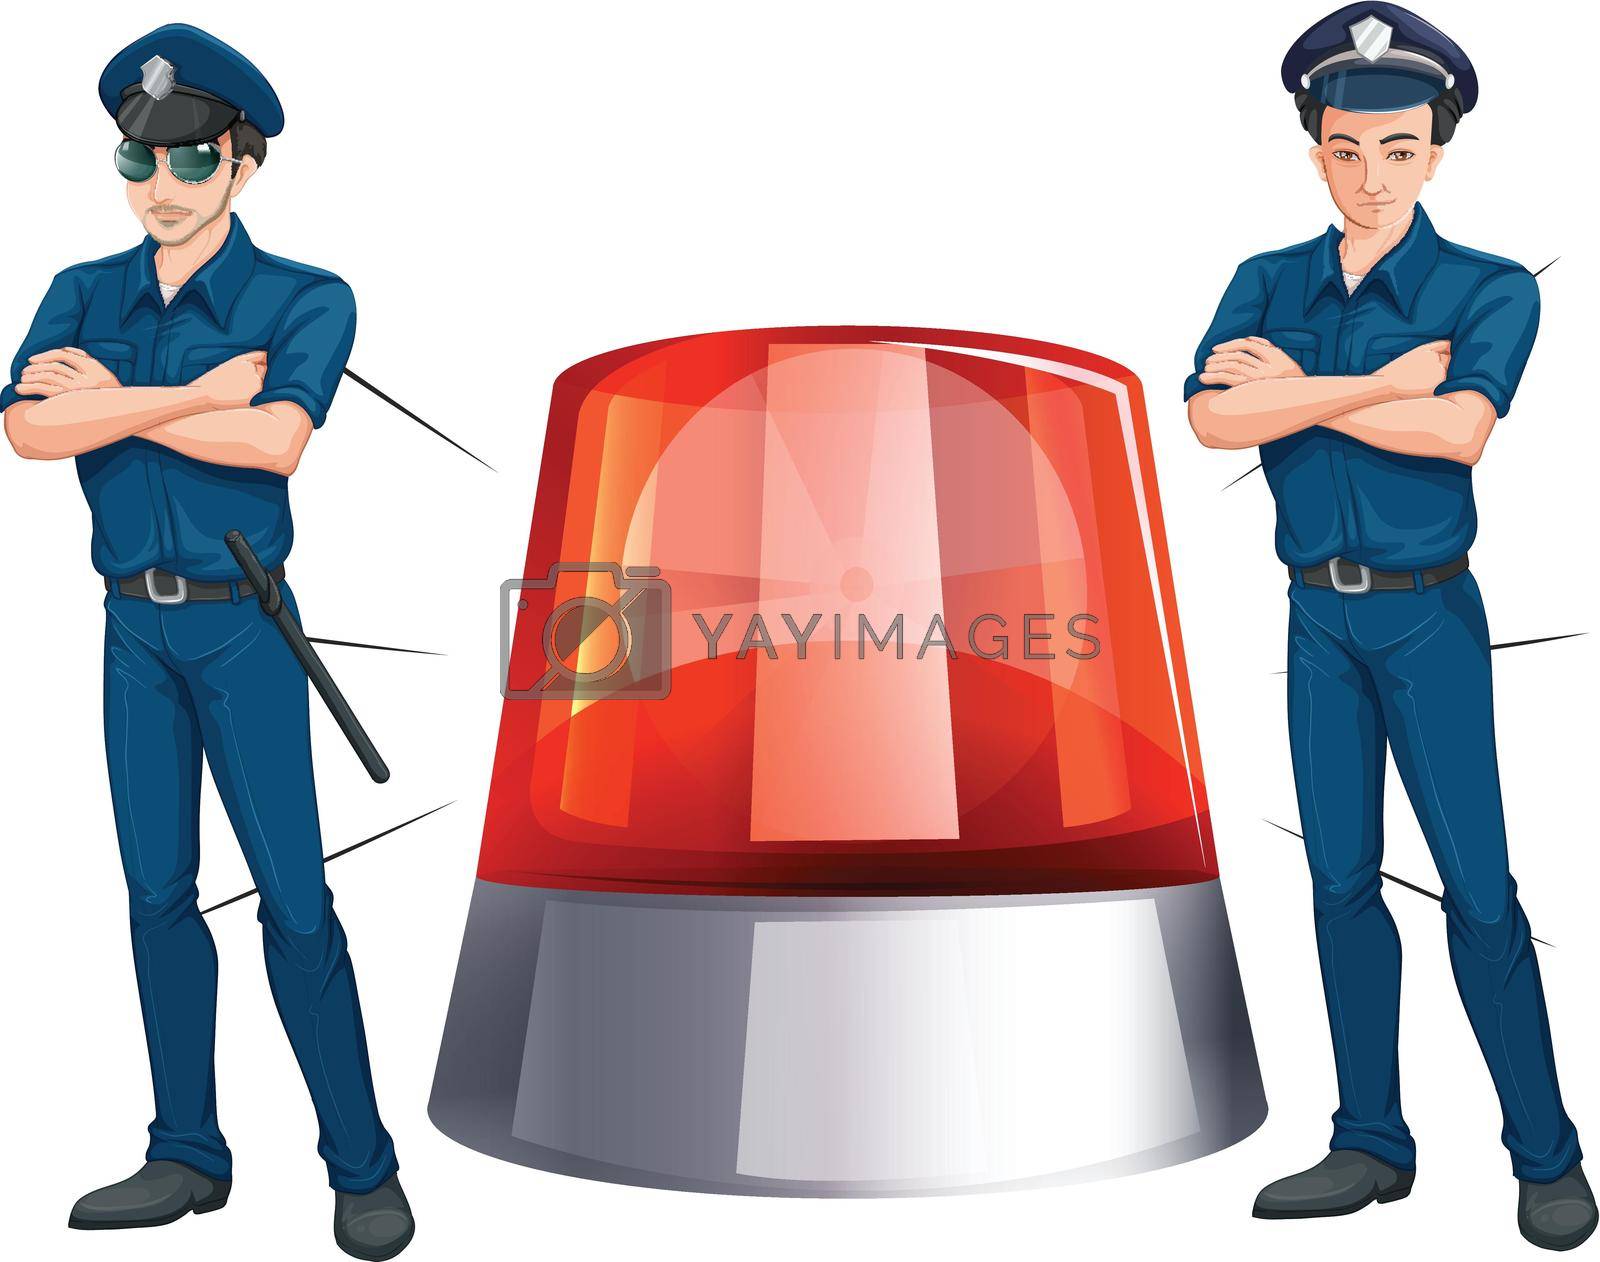 Royalty free image of Police officers and siren light by iimages